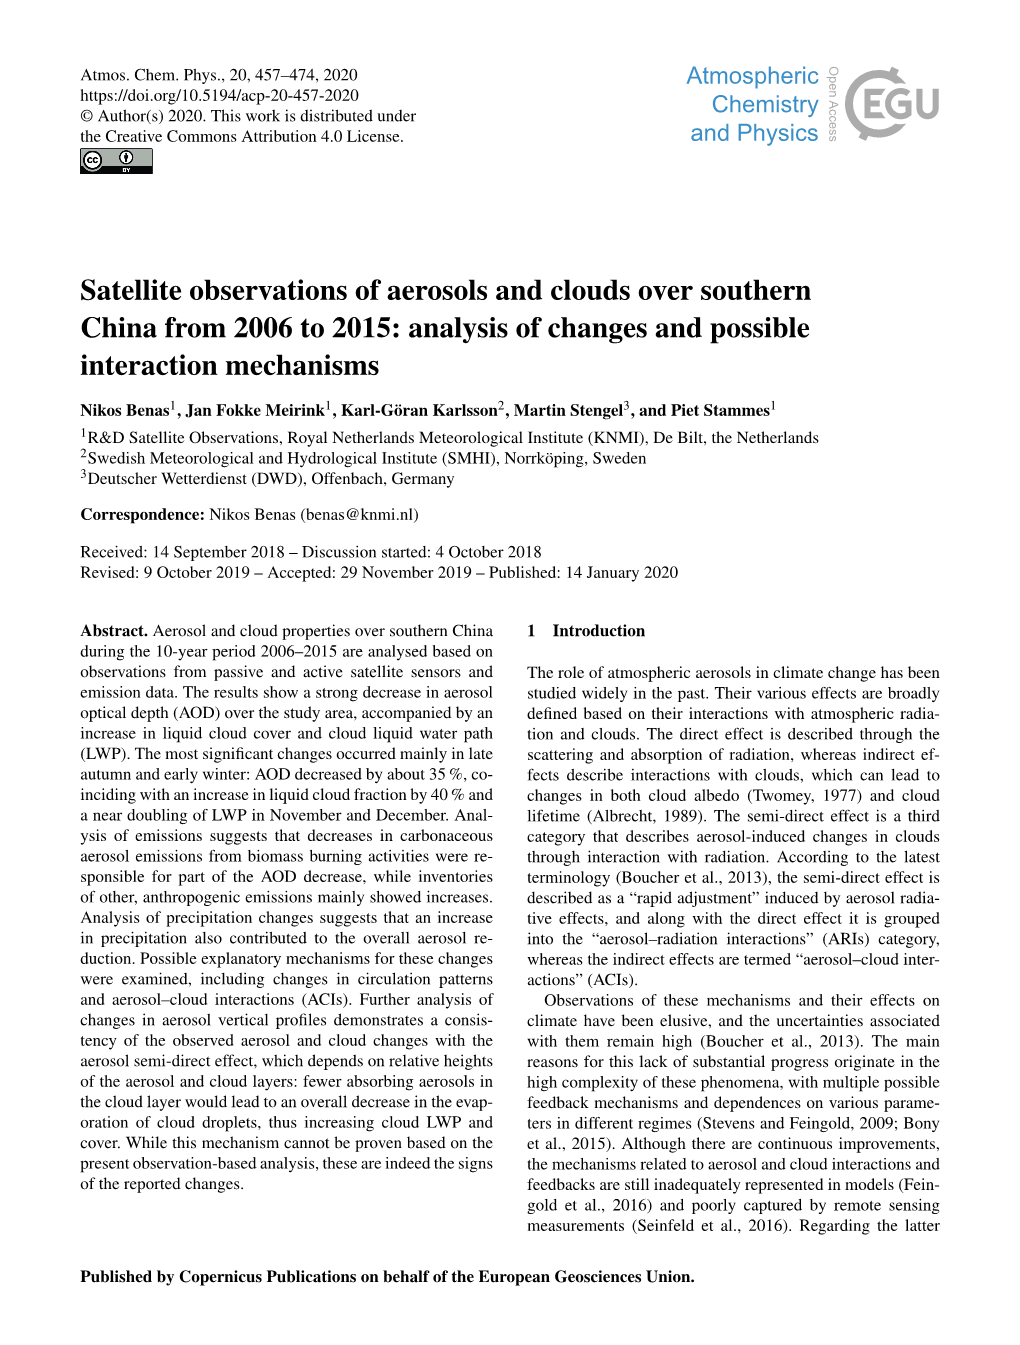 Satellite Observations of Aerosols and Clouds Over Southern China from 2006 to 2015: Analysis of Changes and Possible Interaction Mechanisms